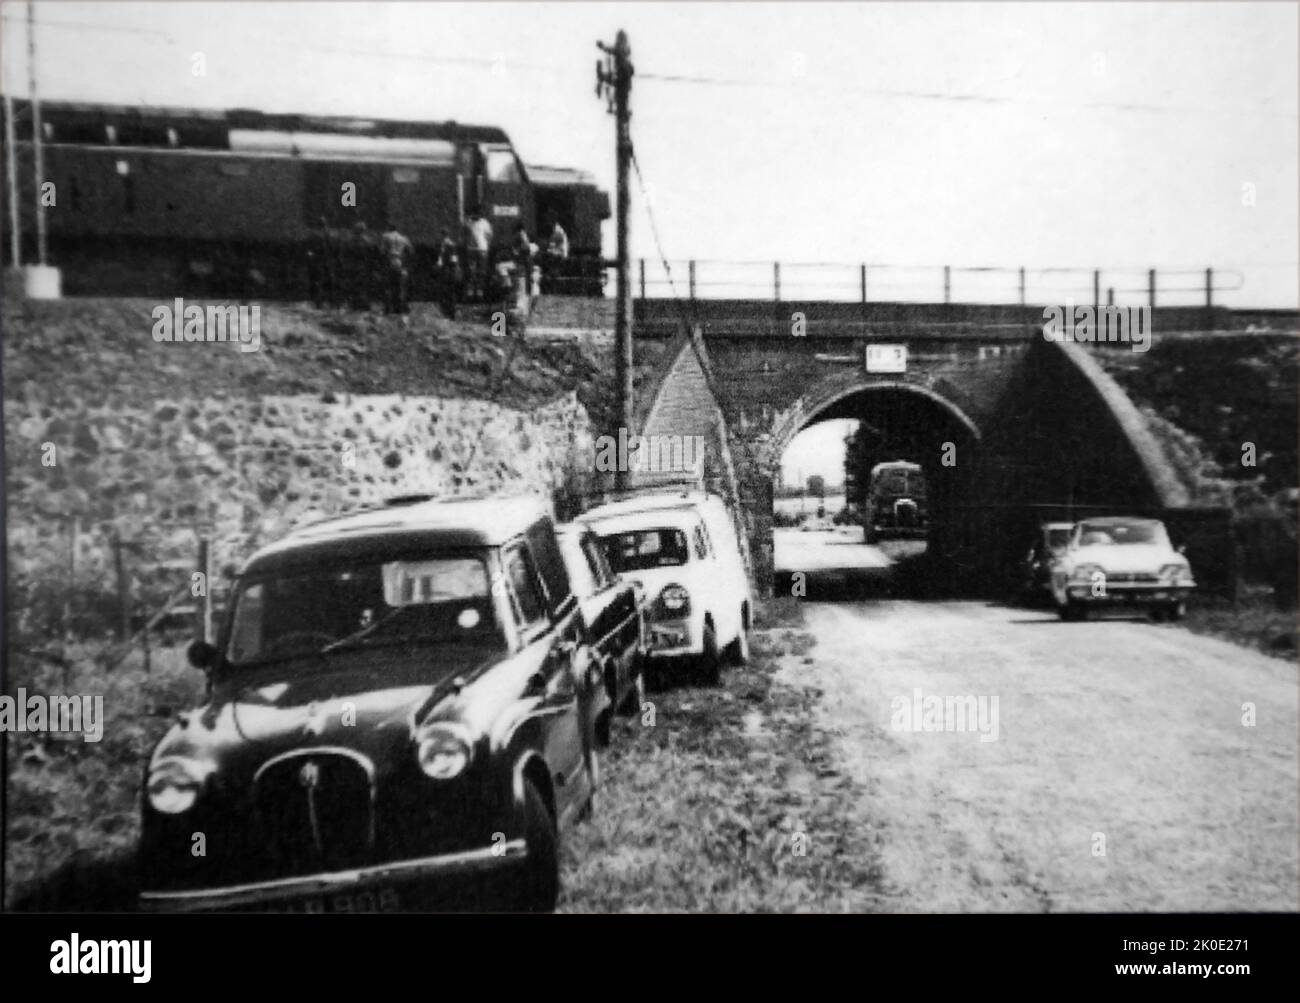 The Great Train Robbery was the robbery of £2.6 million from a Royal Mail train heading from Glasgow to London on the West Coast Main Line in the early hours of 8 August 1963, at Bridge Railway Bridge, Ledburn, near Mentmore in Buckinghamshire, England. Gang members included Bruce Reynolds, Gordon Goody, Buster Edwards, Charlie Wilson, Roy James, John Daly, Jimmy White, Ronnie Biggs, Tommy Wisbey, Jim Hussey, Bob Welch and Roger Cordrey, as well Harry Smith and Danny Pembroke. Stock Photo